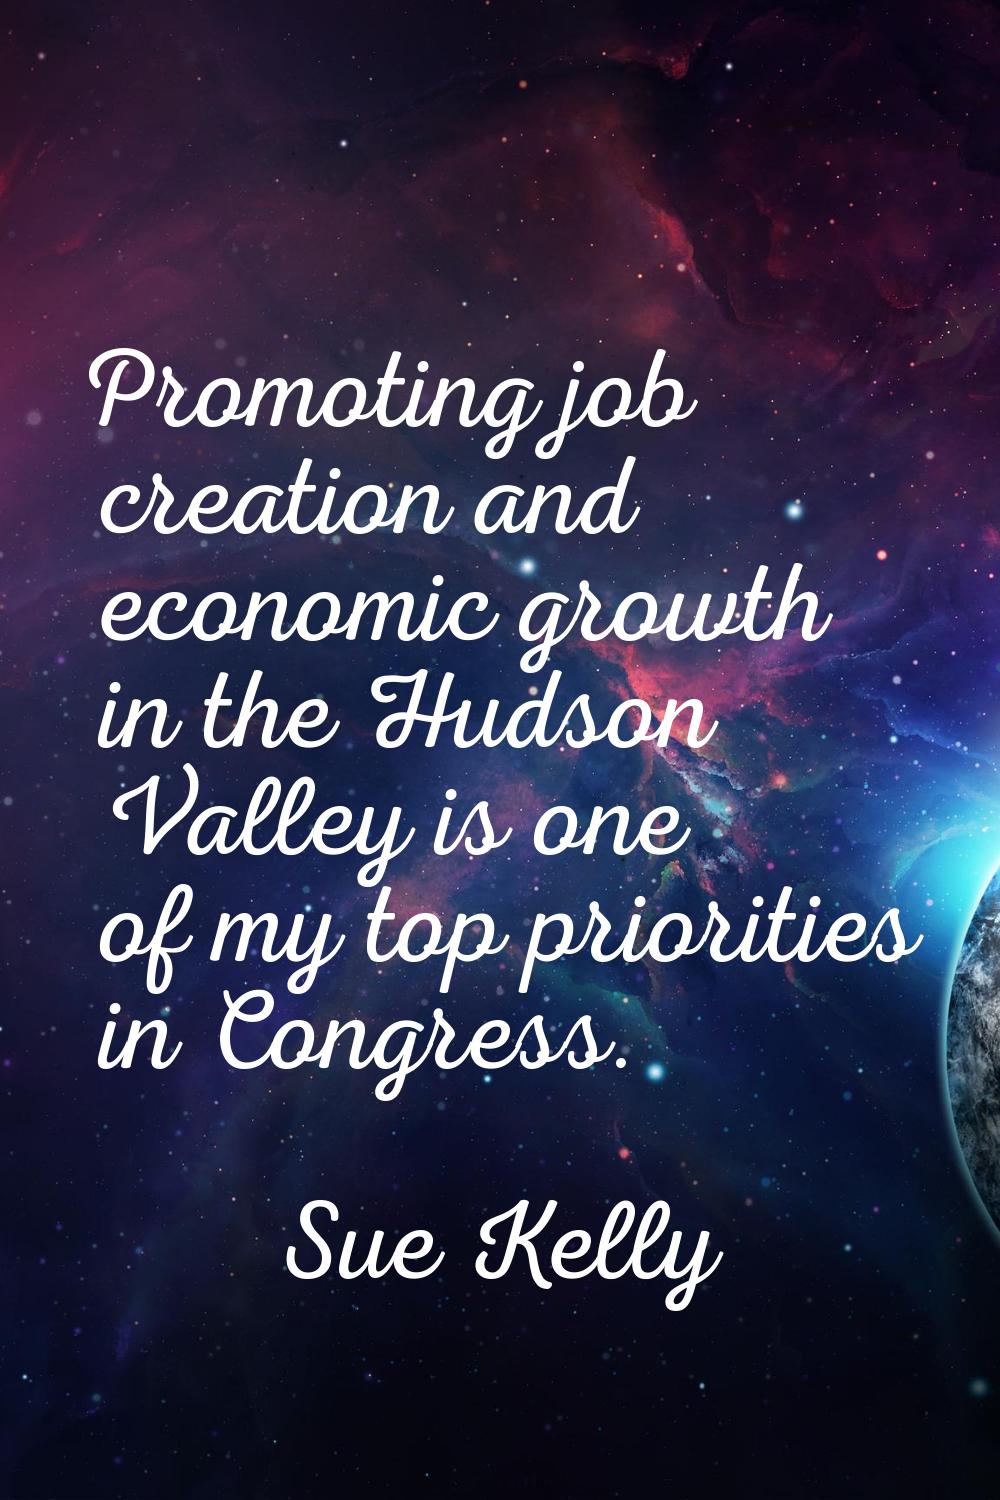 Promoting job creation and economic growth in the Hudson Valley is one of my top priorities in Cong